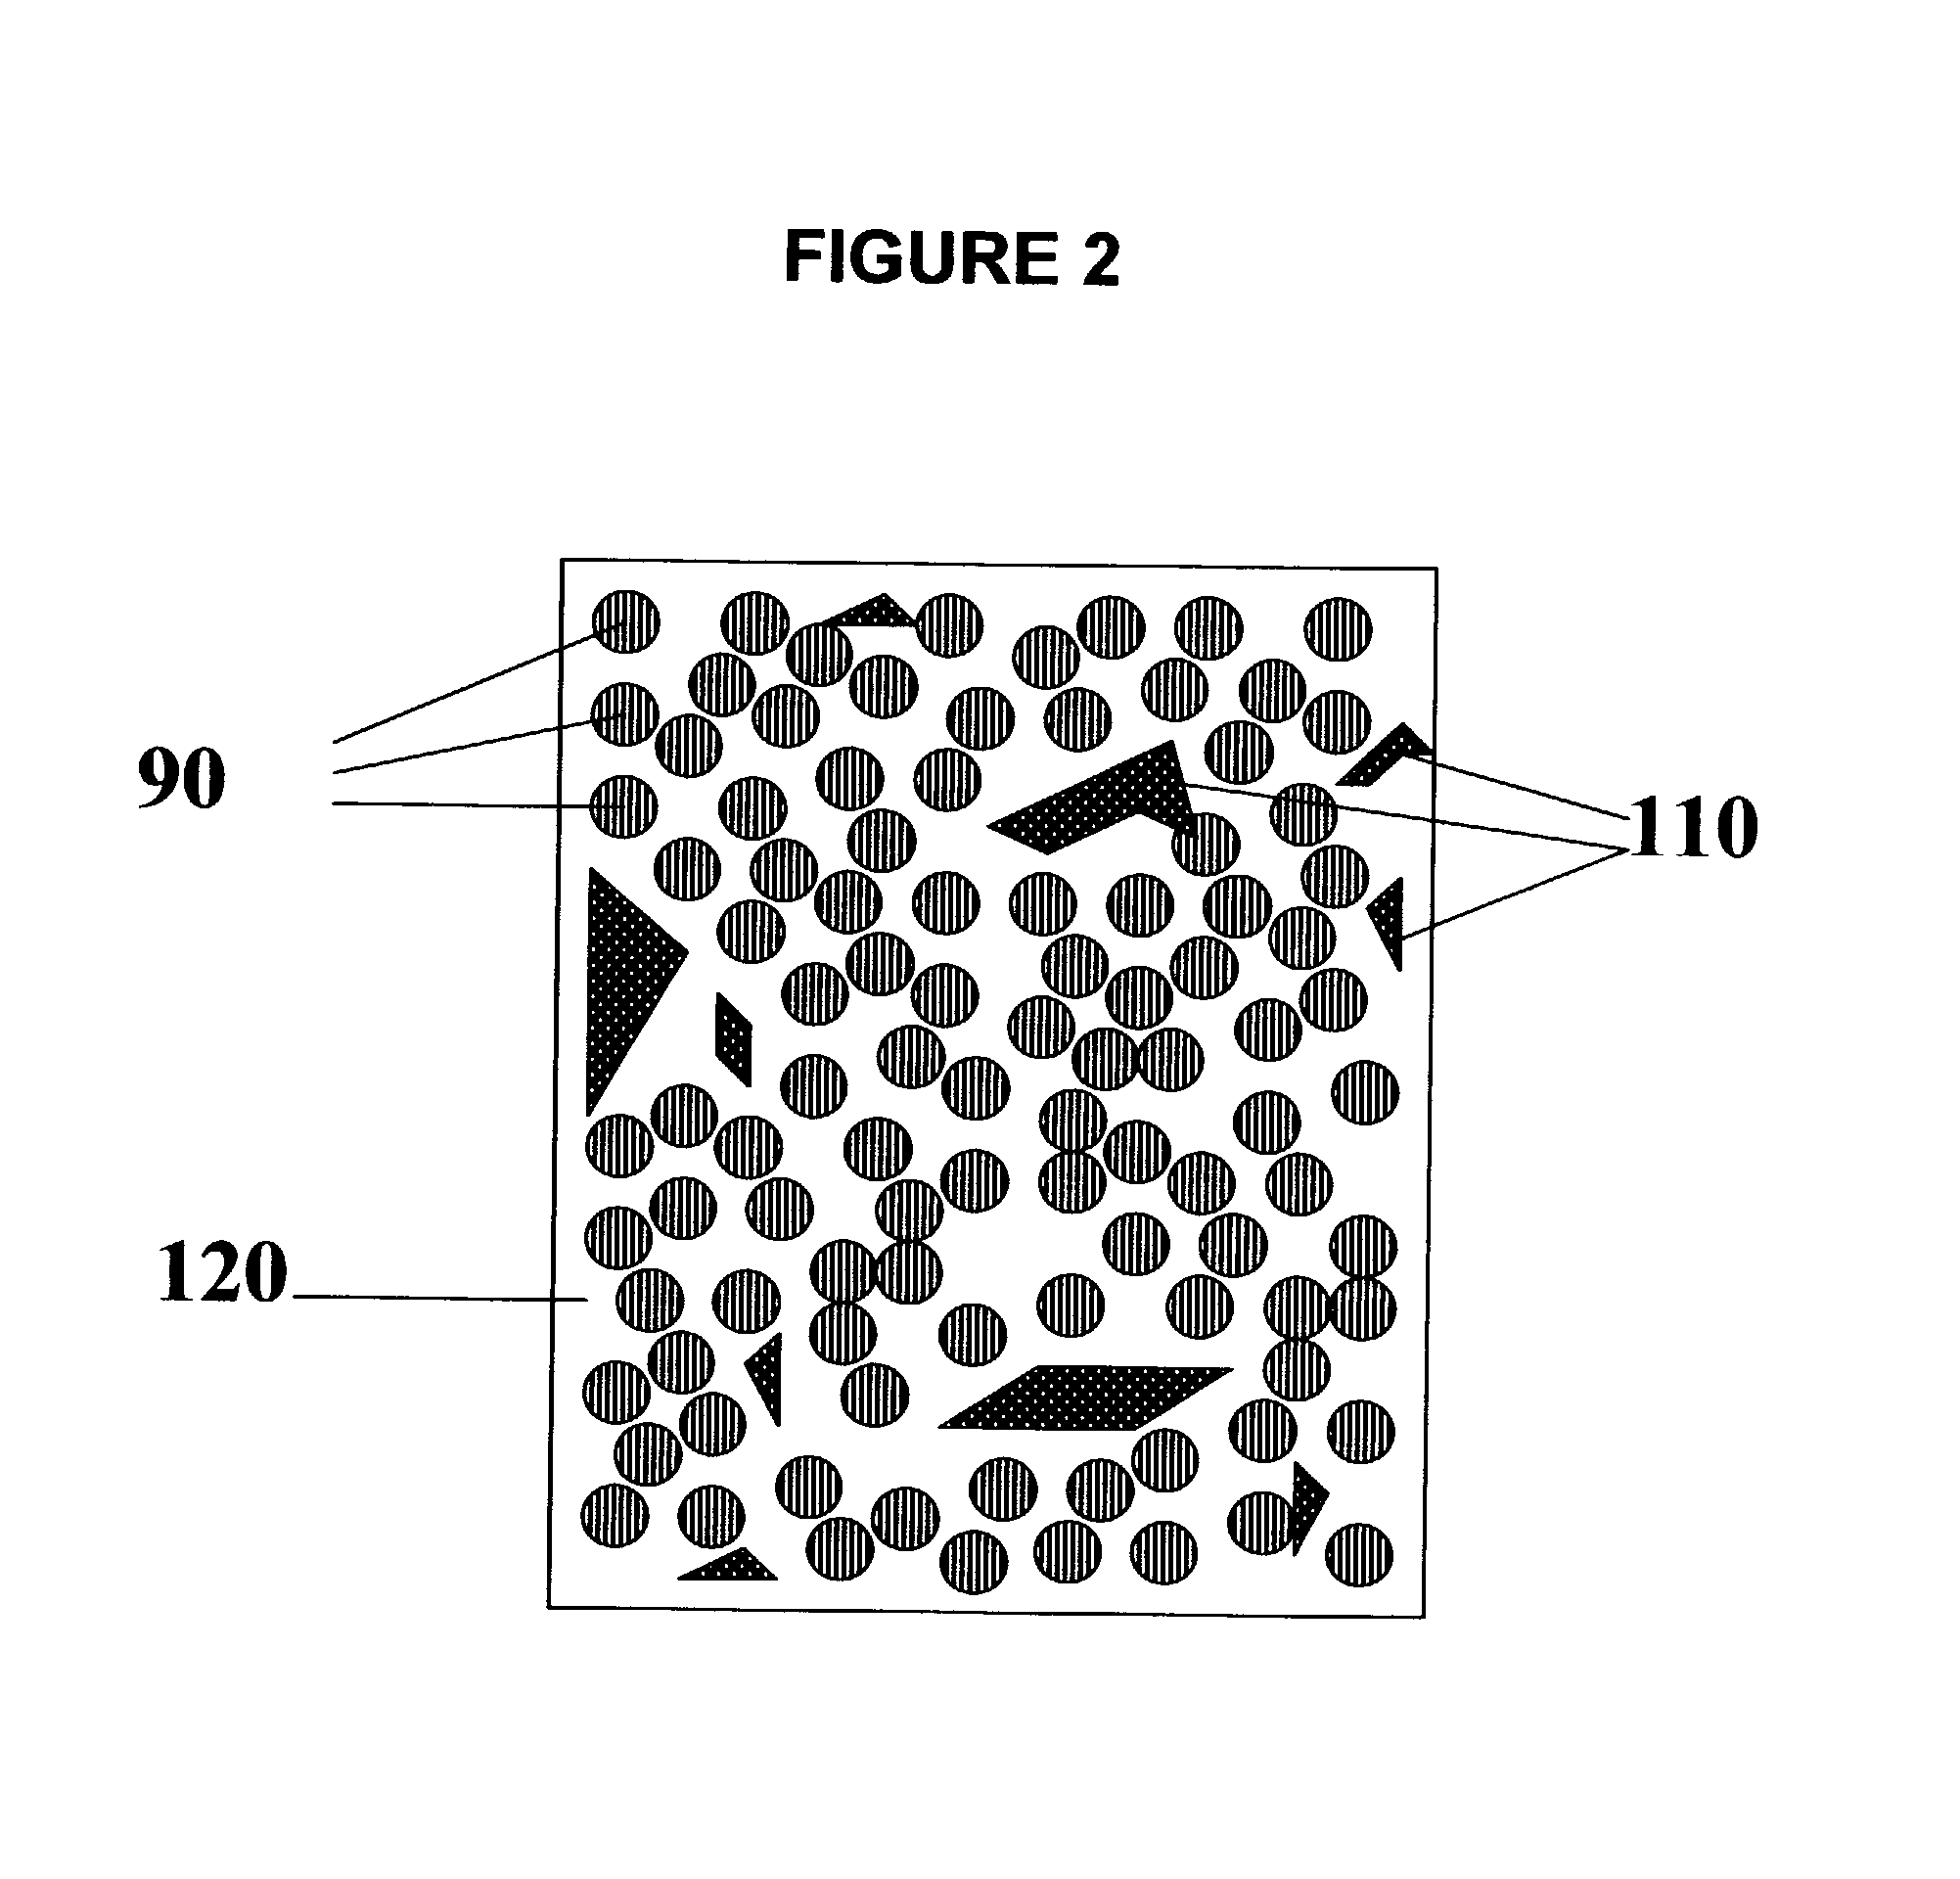 Method of producing shared articles